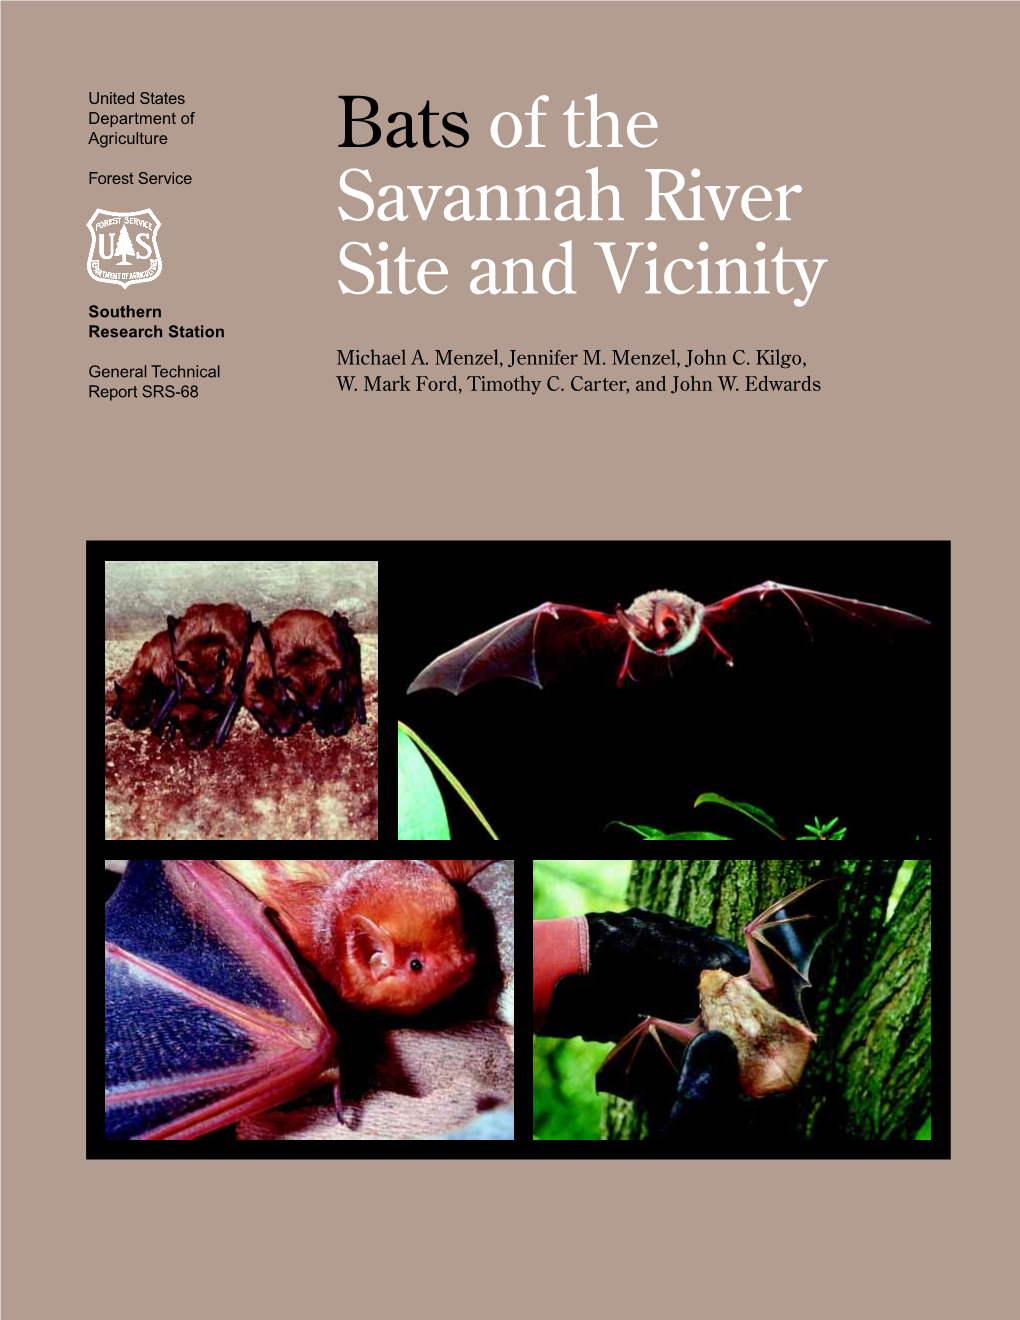 Bats of the Savannah River Site and Vicinity